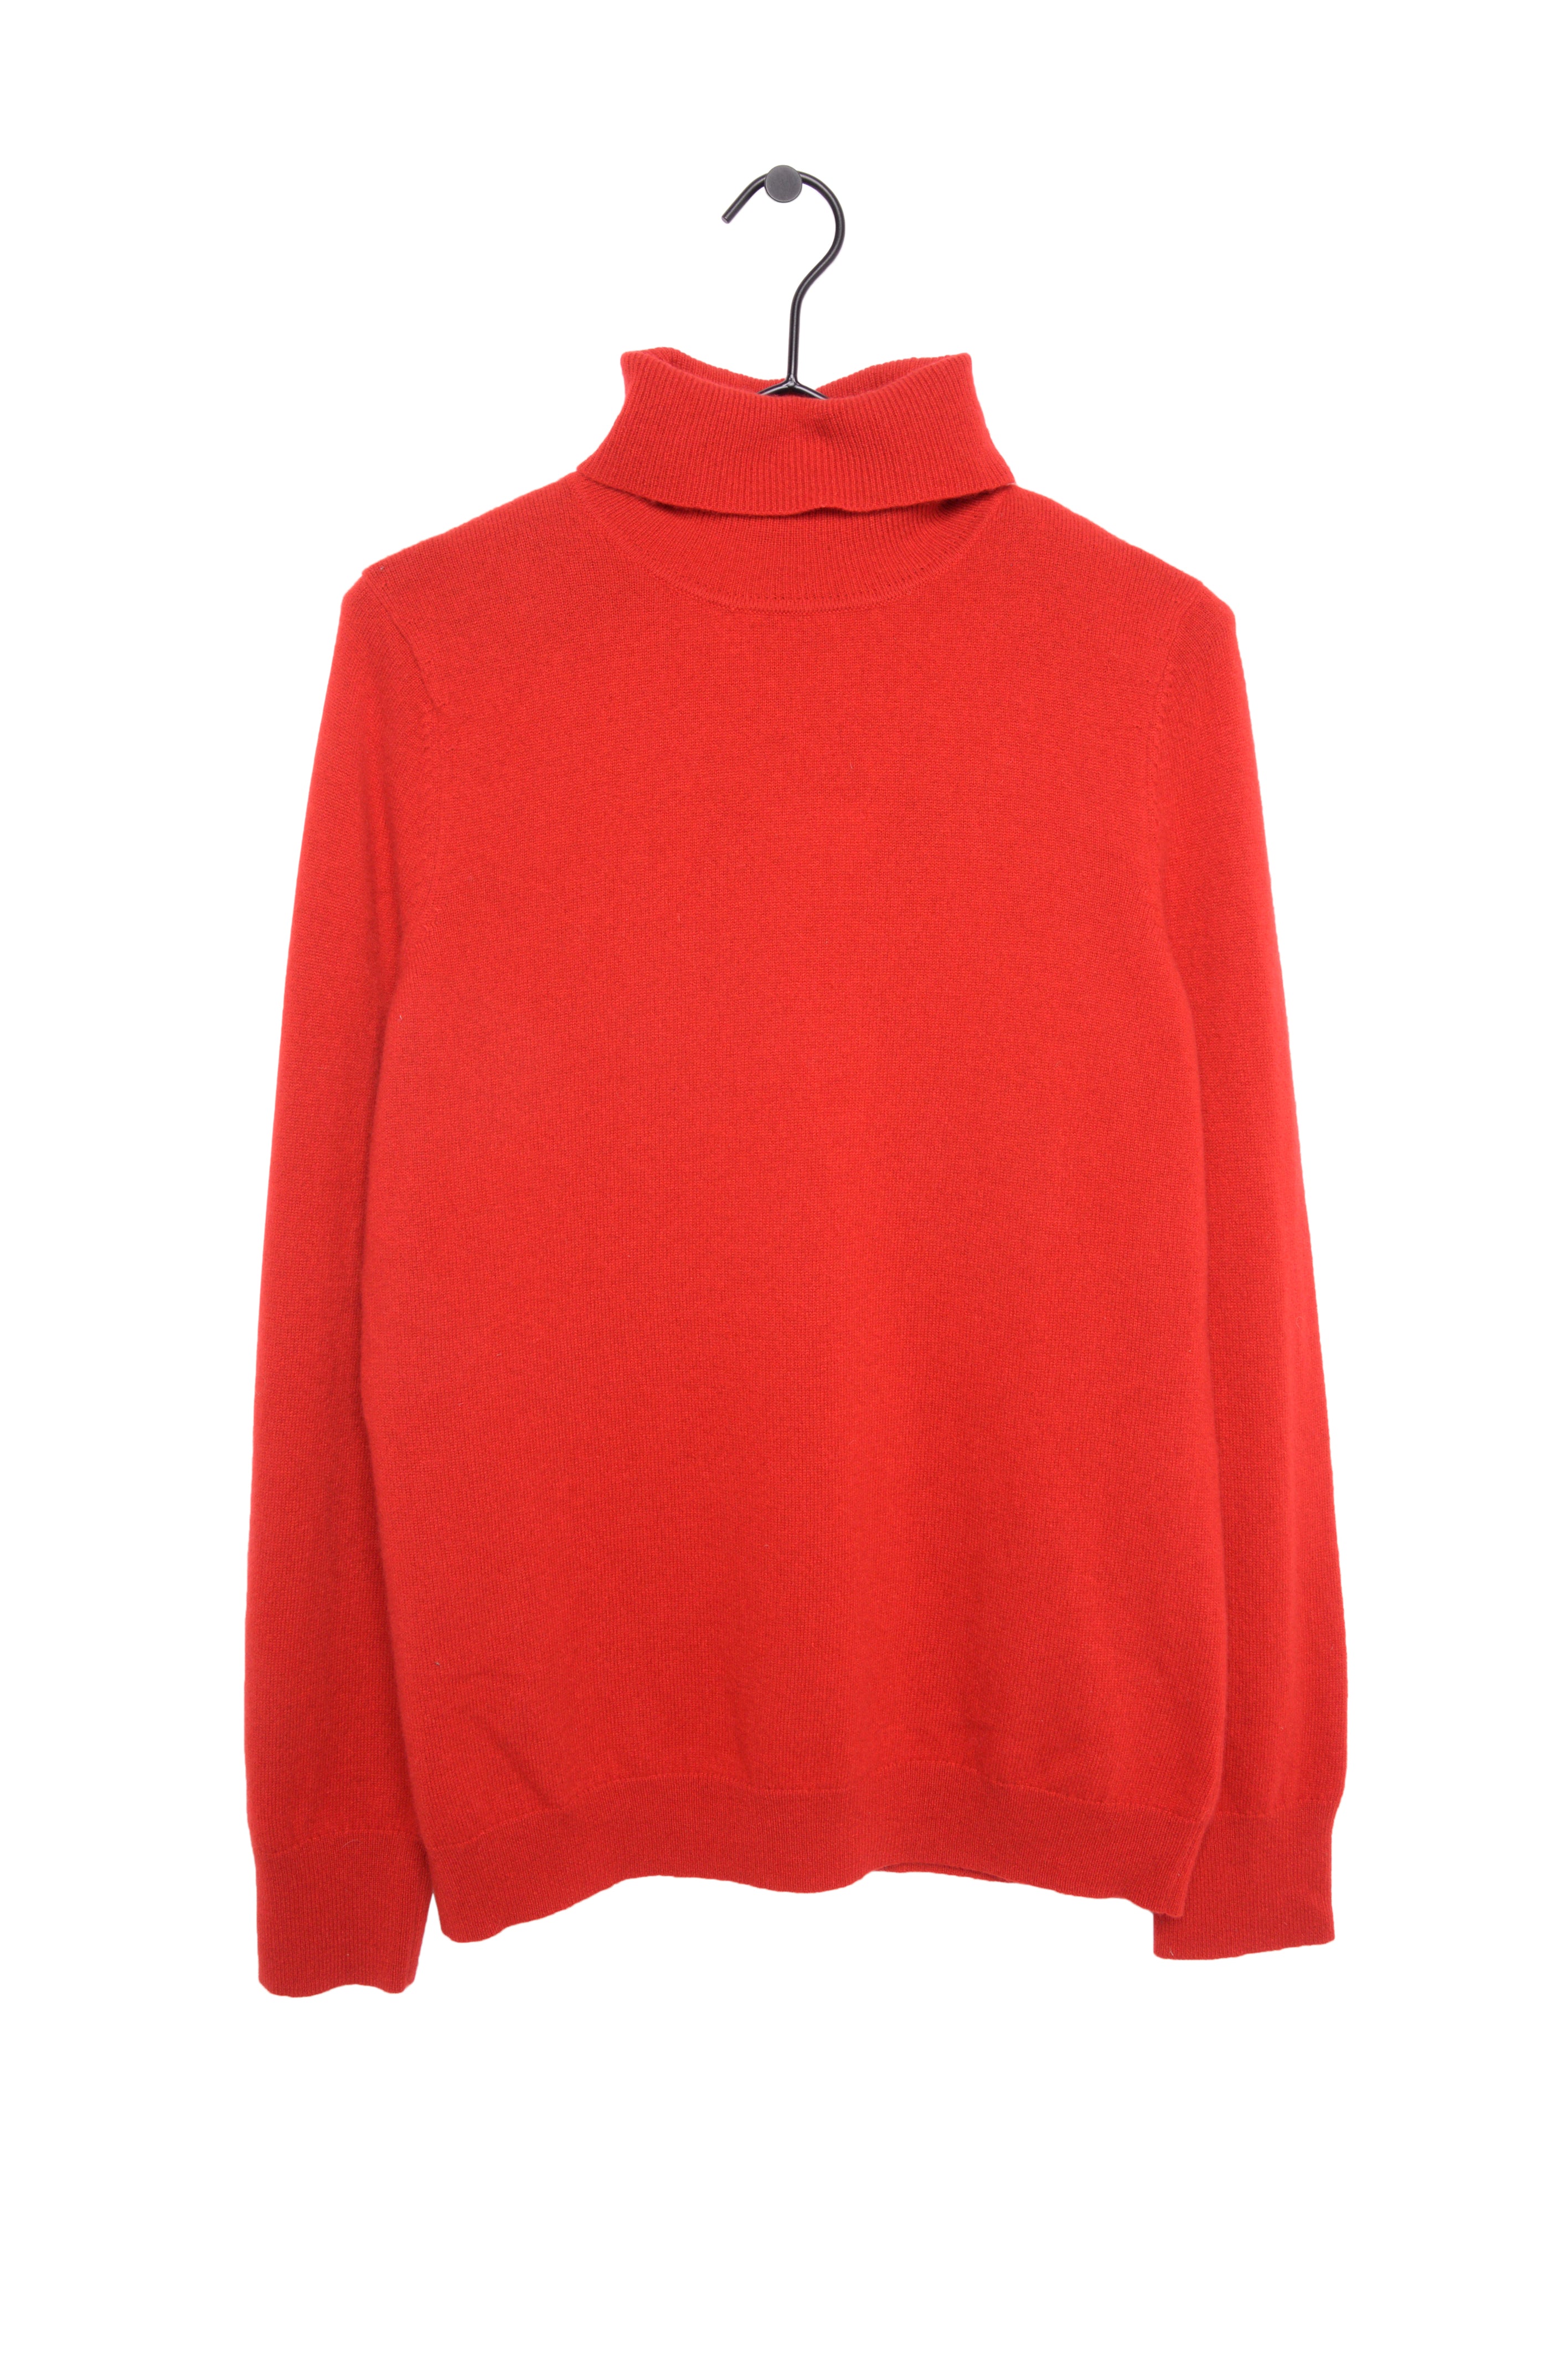 Multilayer Heart Frayed Edge Knit Sweater in Red